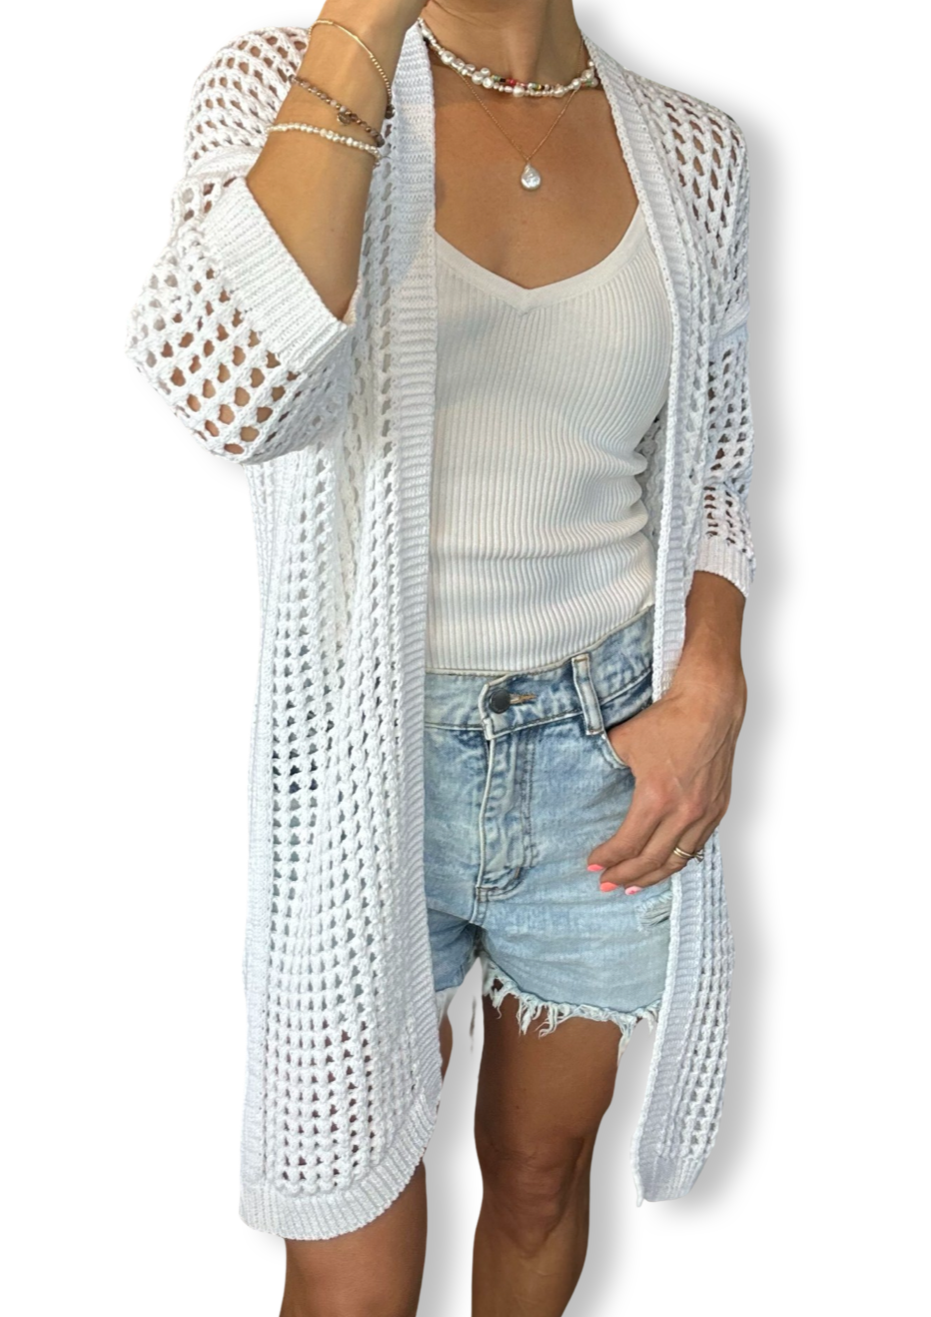 Dalia Longline Cardigan - White, Candy Pink or Ocean, by Amici Add a pop of colour, or fresh summer white to any outfit, with these gorgeous free-size long-line cardigans.. The Dalia Cardigan is perfect over singlets and denims, or over your strappy summer dresses. For casual holiday style.